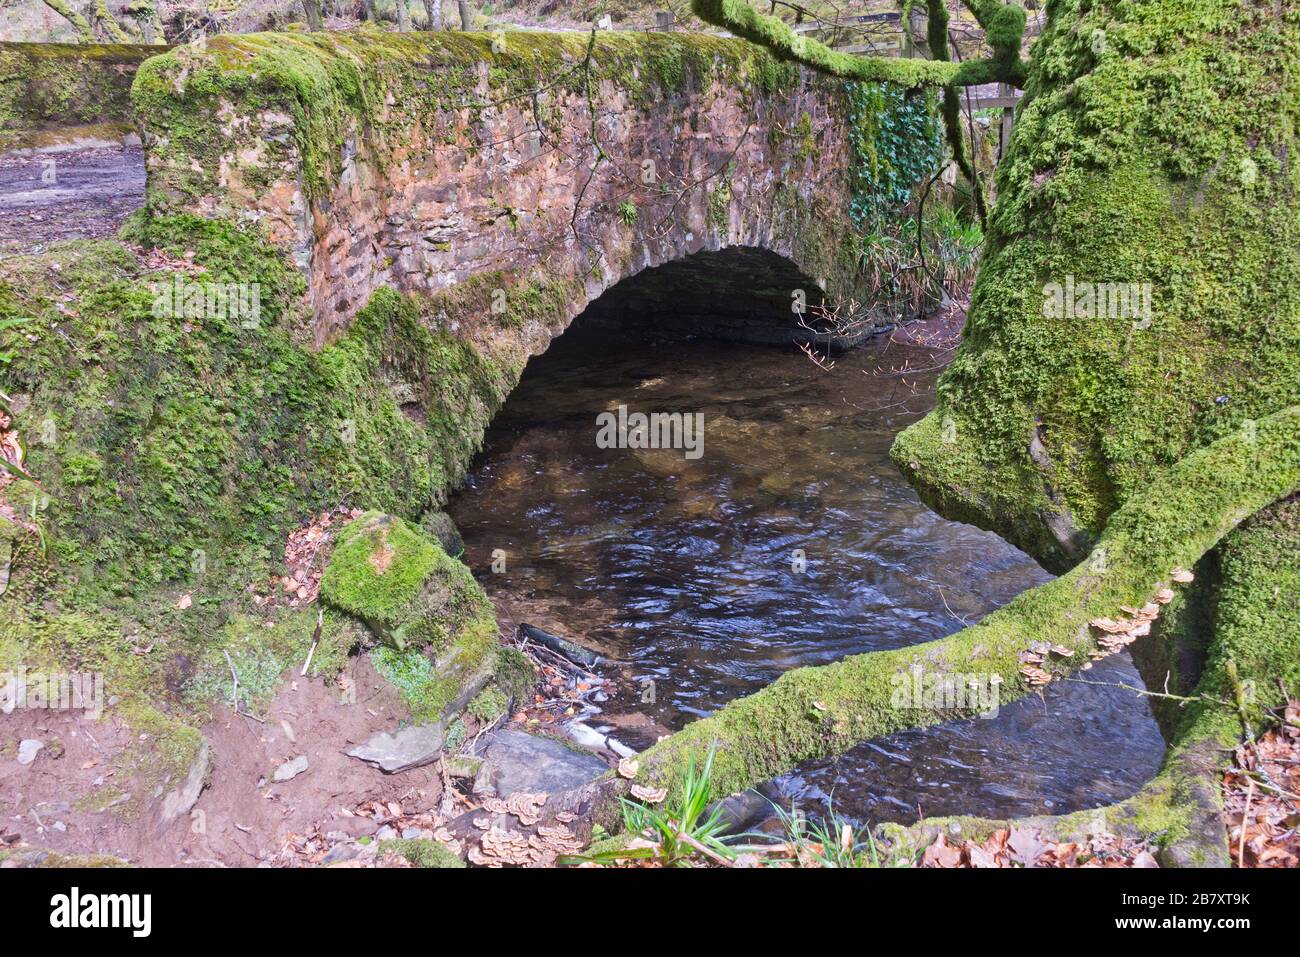 the meeting of Danes Brook and River Barle at Castle Bridge on the Exe Valley Way just west of Dulverton in the Exmoor National Park, England, UK Stock Photo